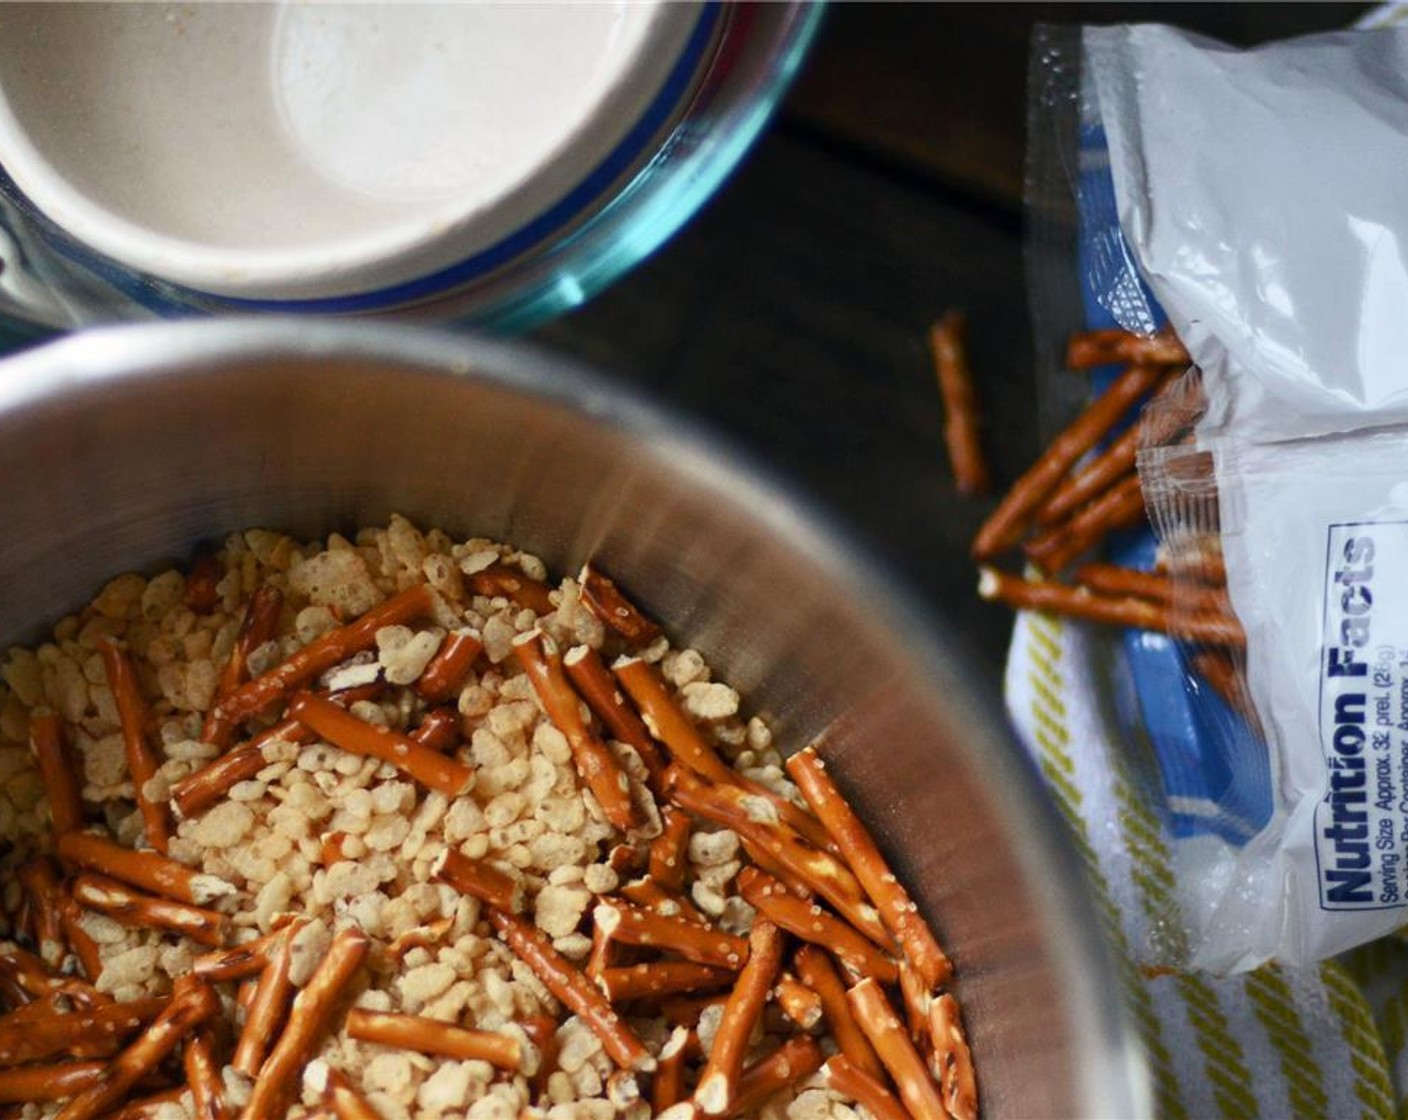 step 2 In a large mixing bowl, toss together Rice Cereal (5 cups) and Pretzel Sticks (3 cups). Set aside.